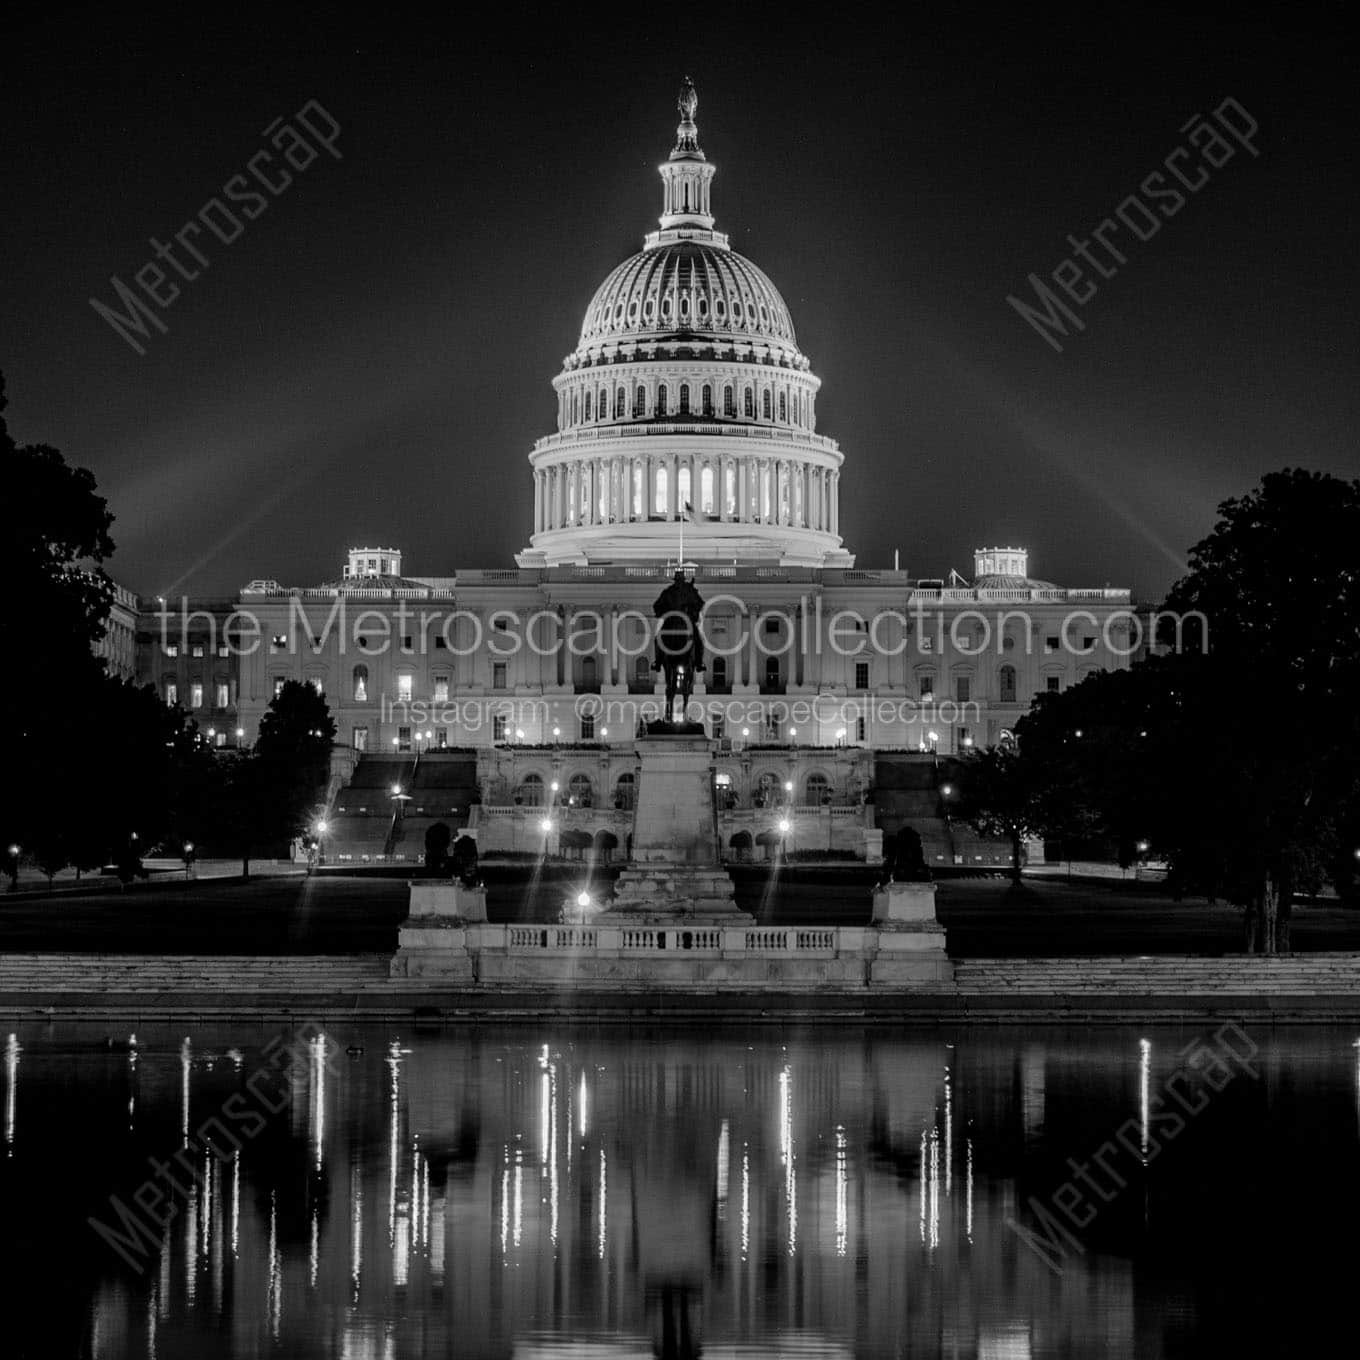 us capitol building at night Black & White Office Art